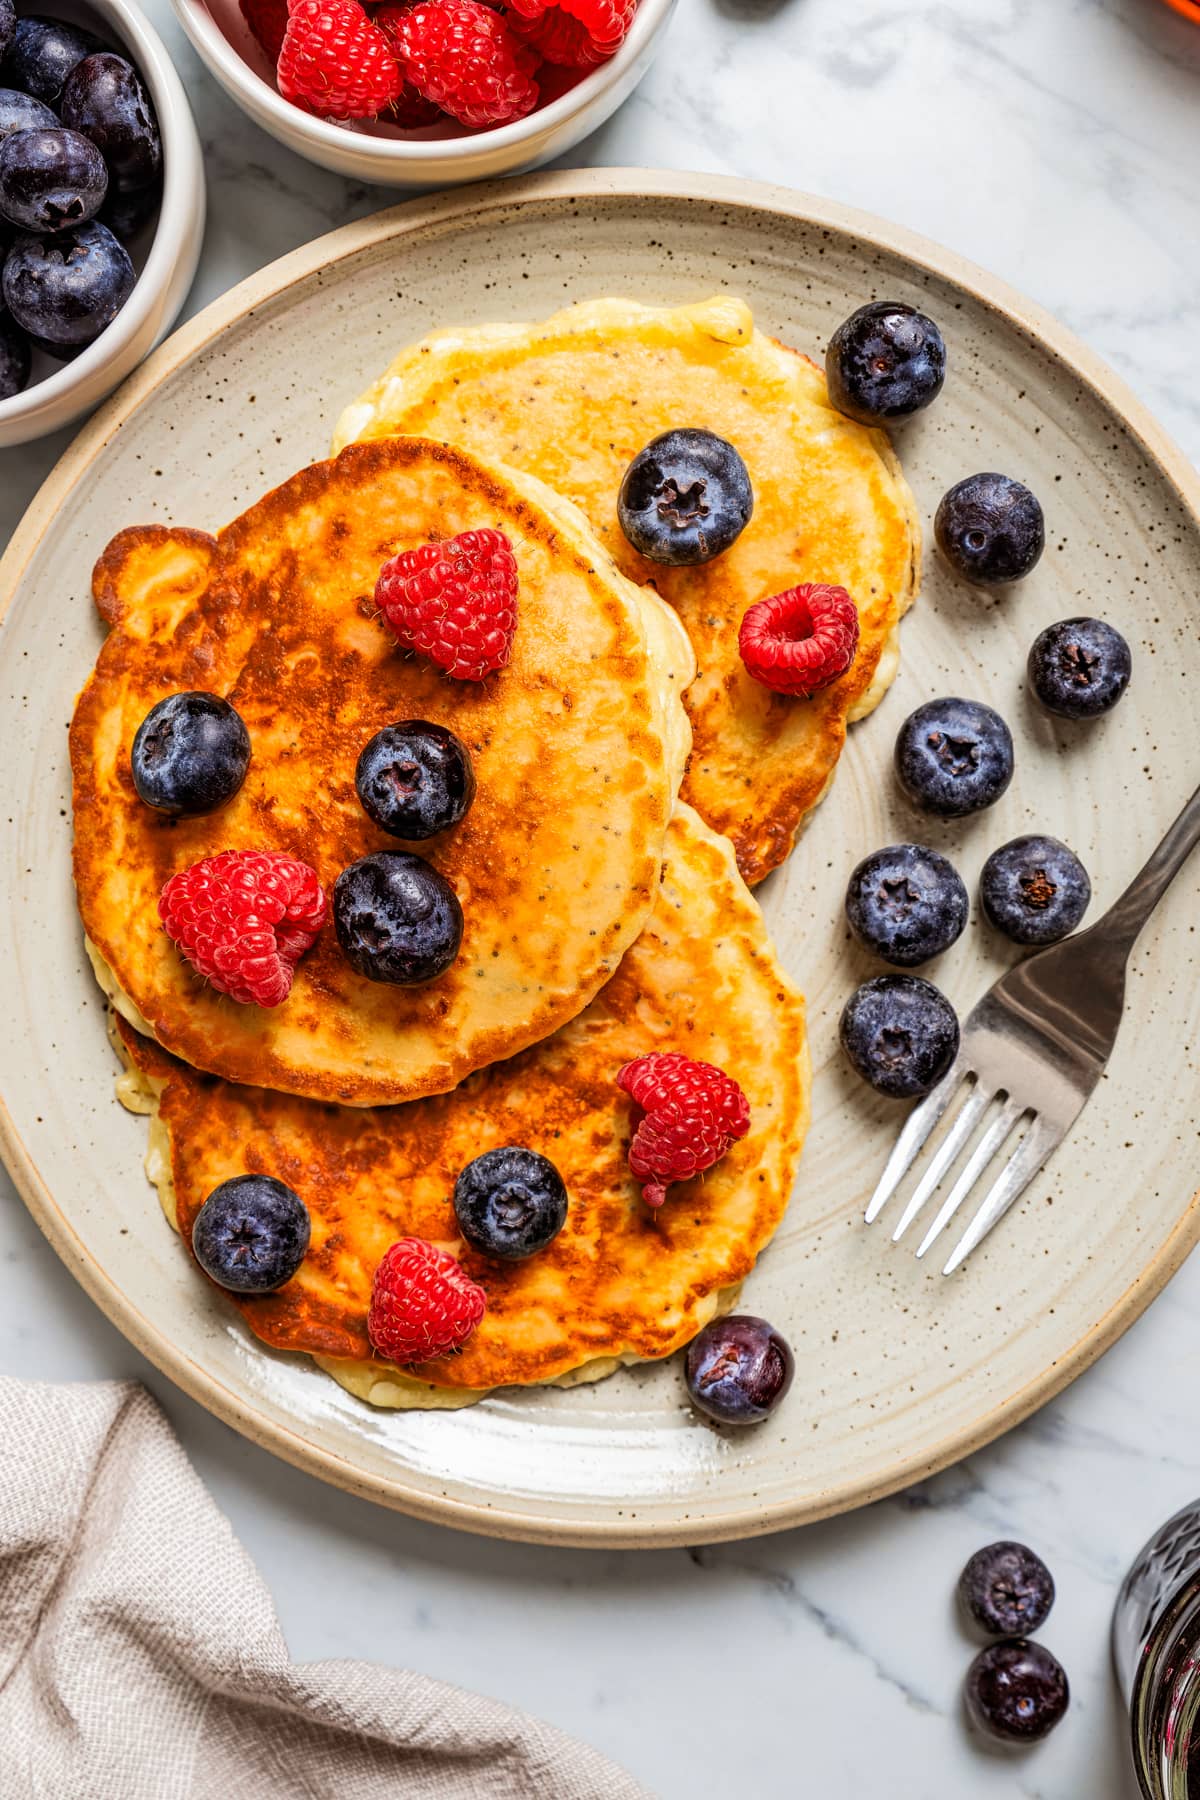 Three pancakes served on a plate and topped with blueberries and raspberries.